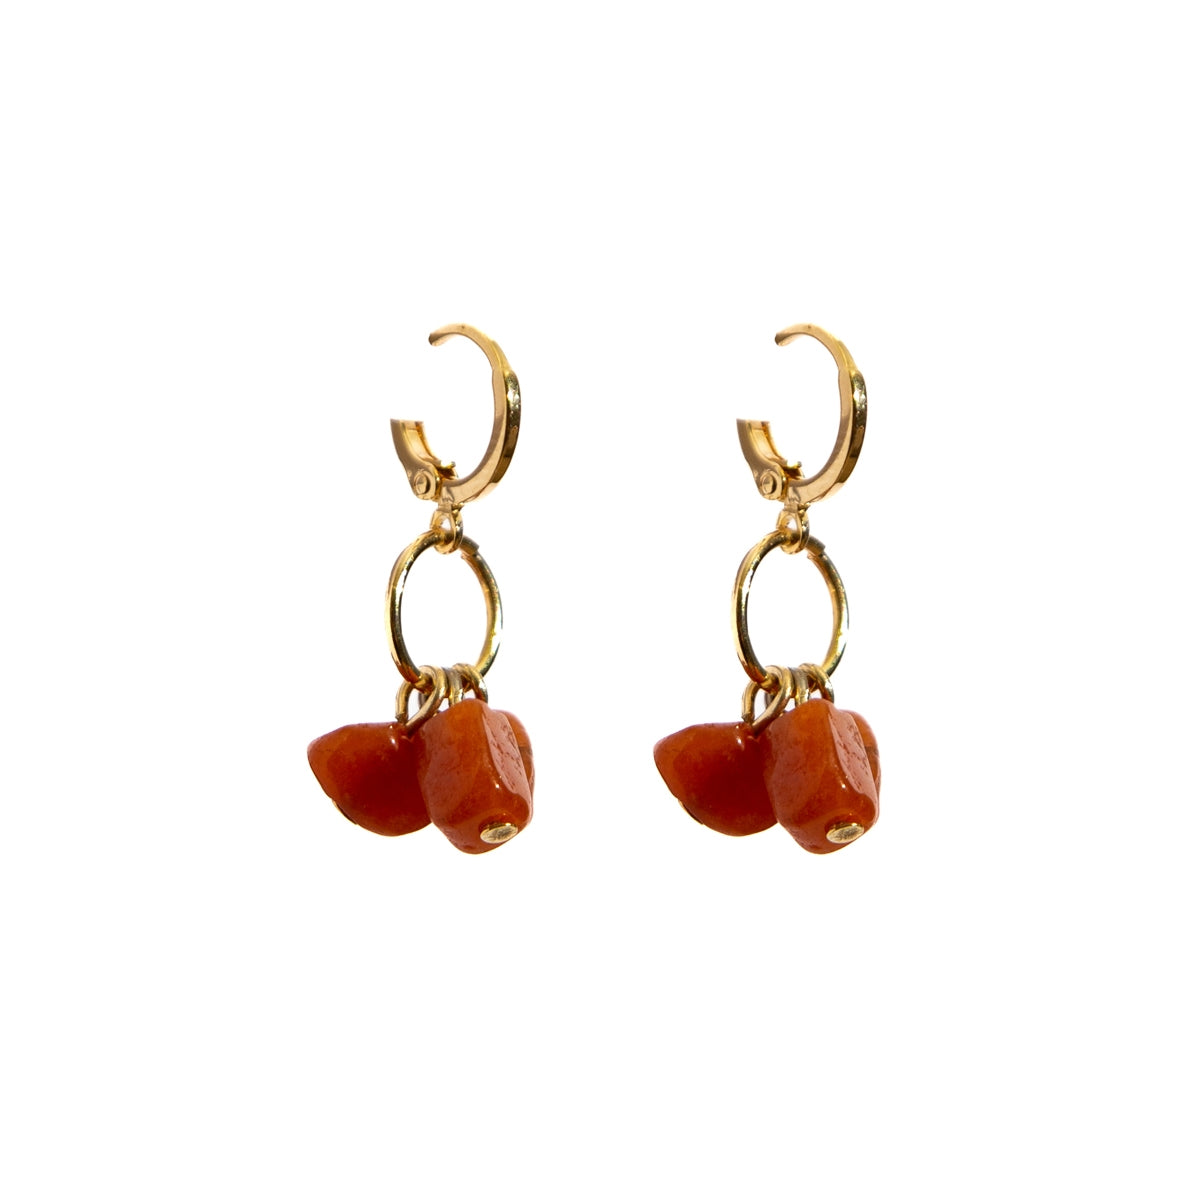 Natalia's earring with natural stones, gold-plated